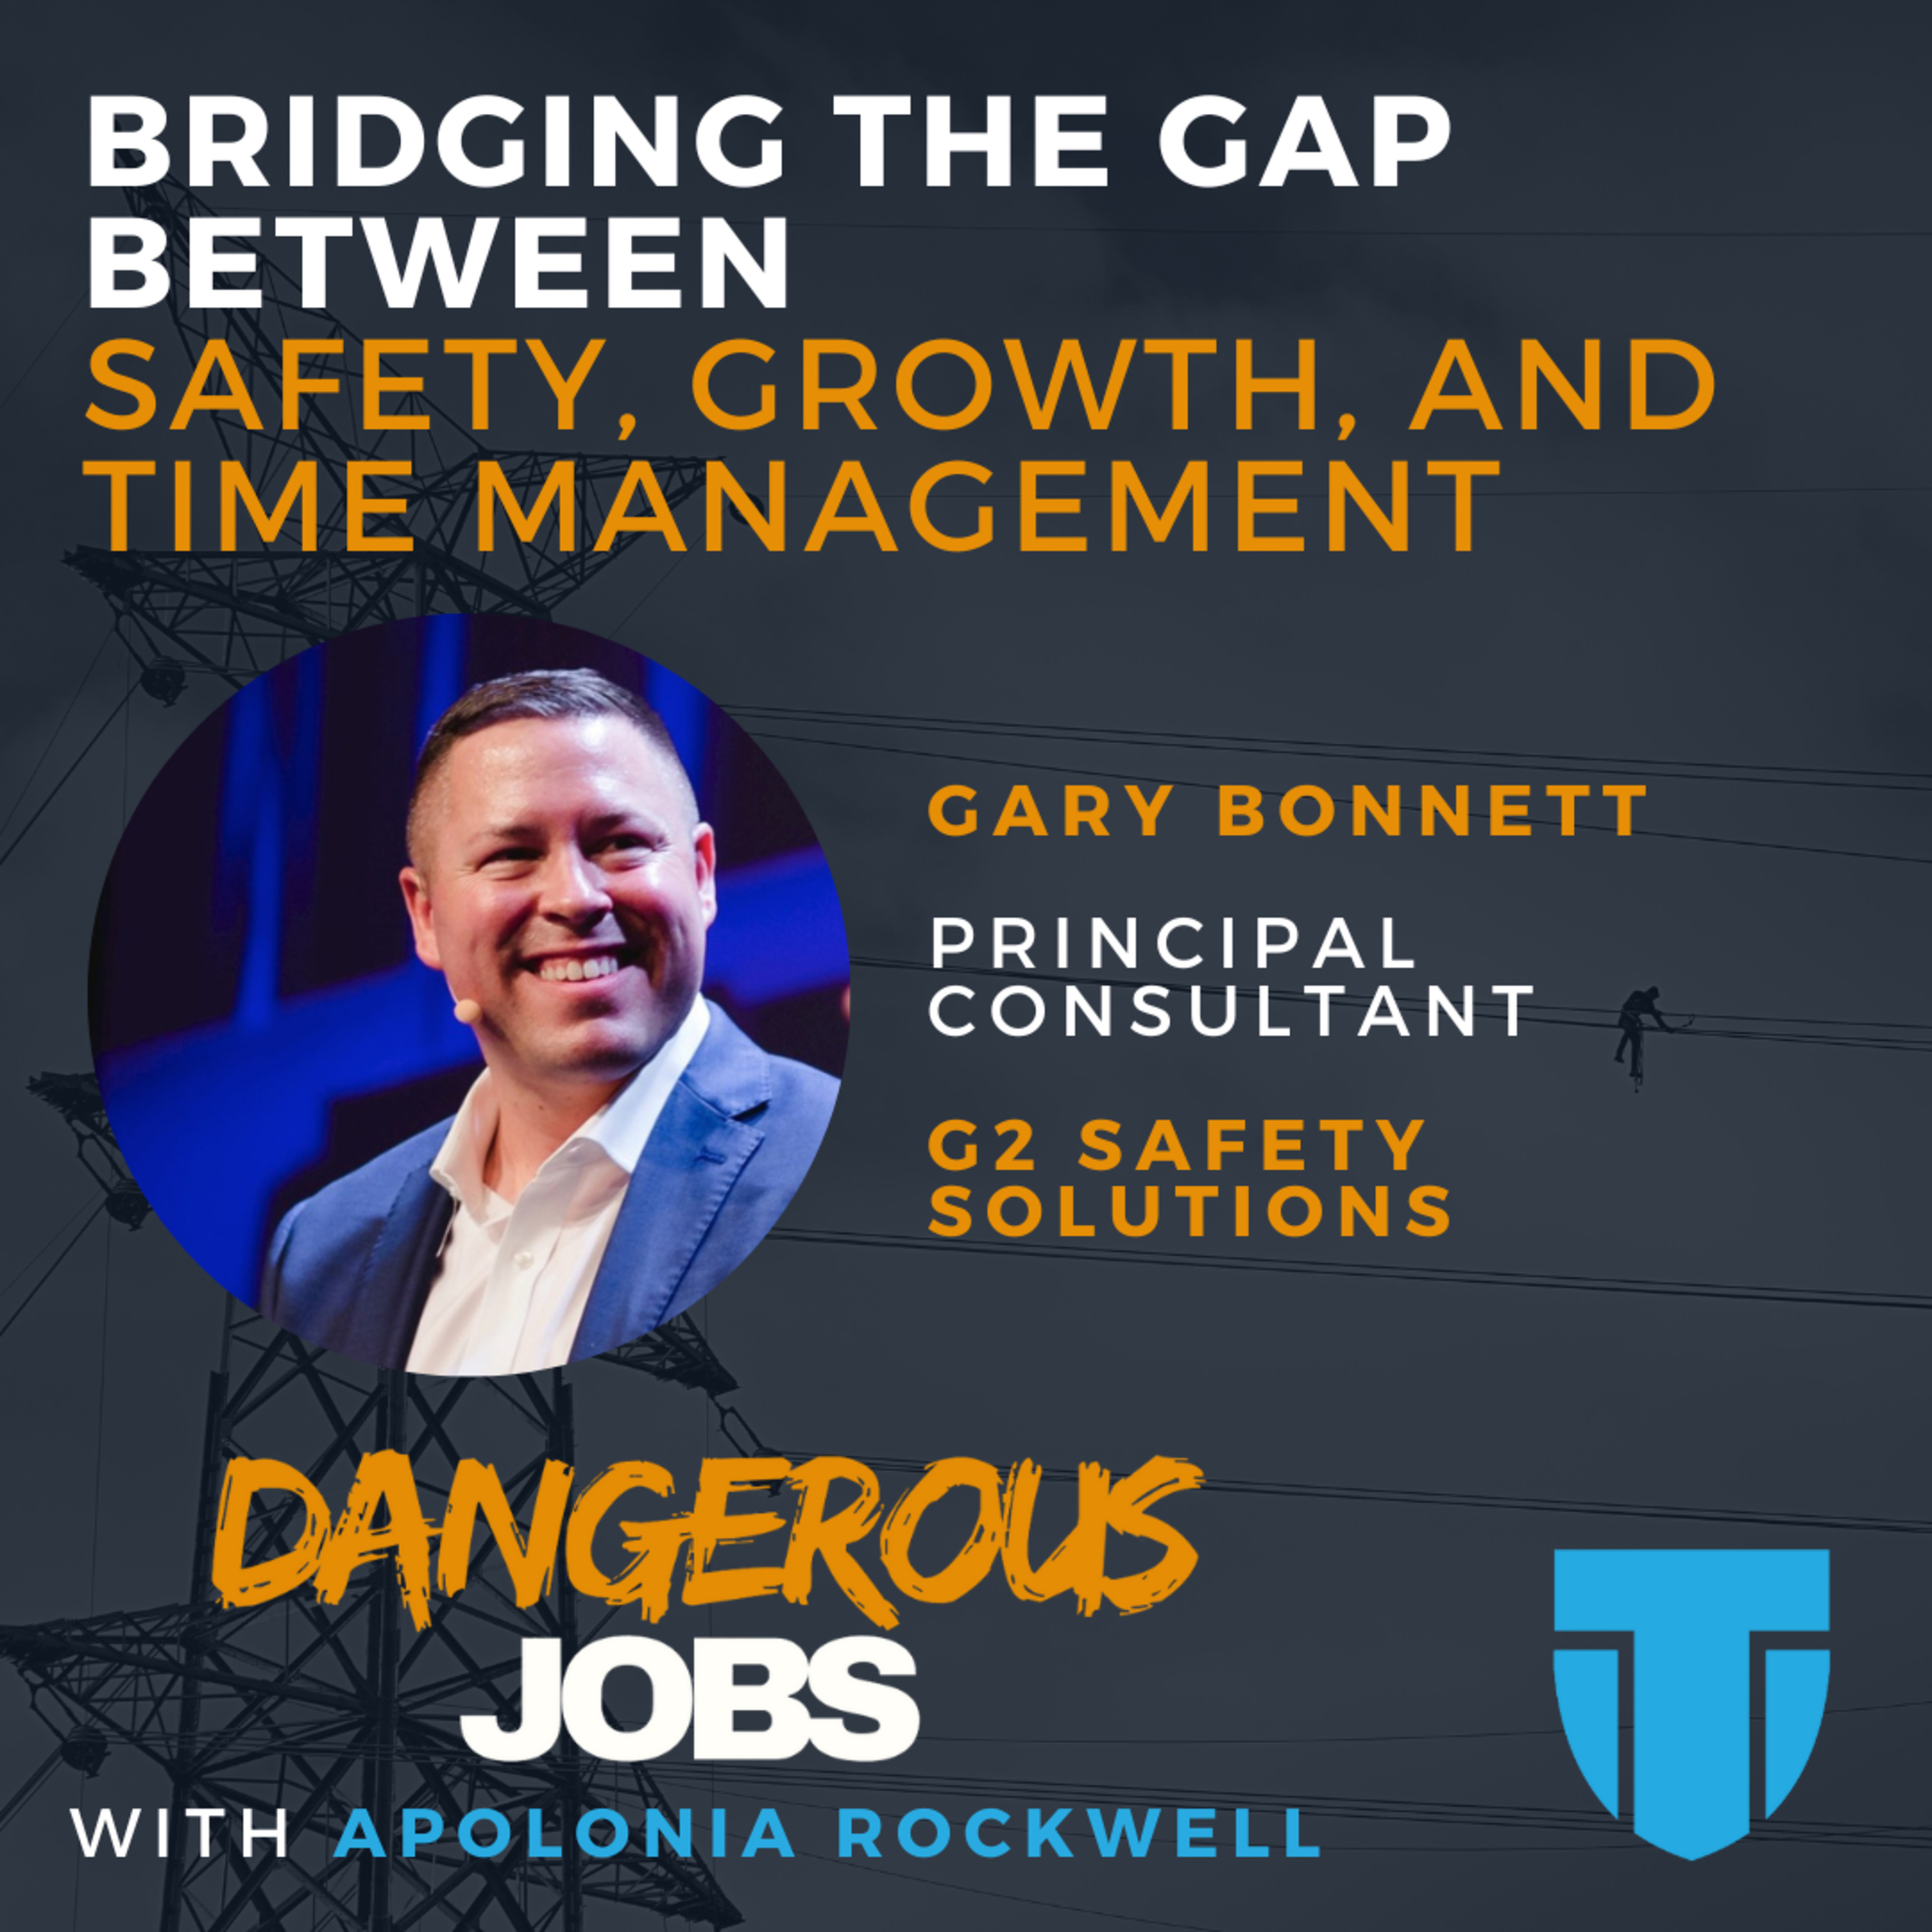 Bridging the Gap Between Safety, Growth, and Time Management